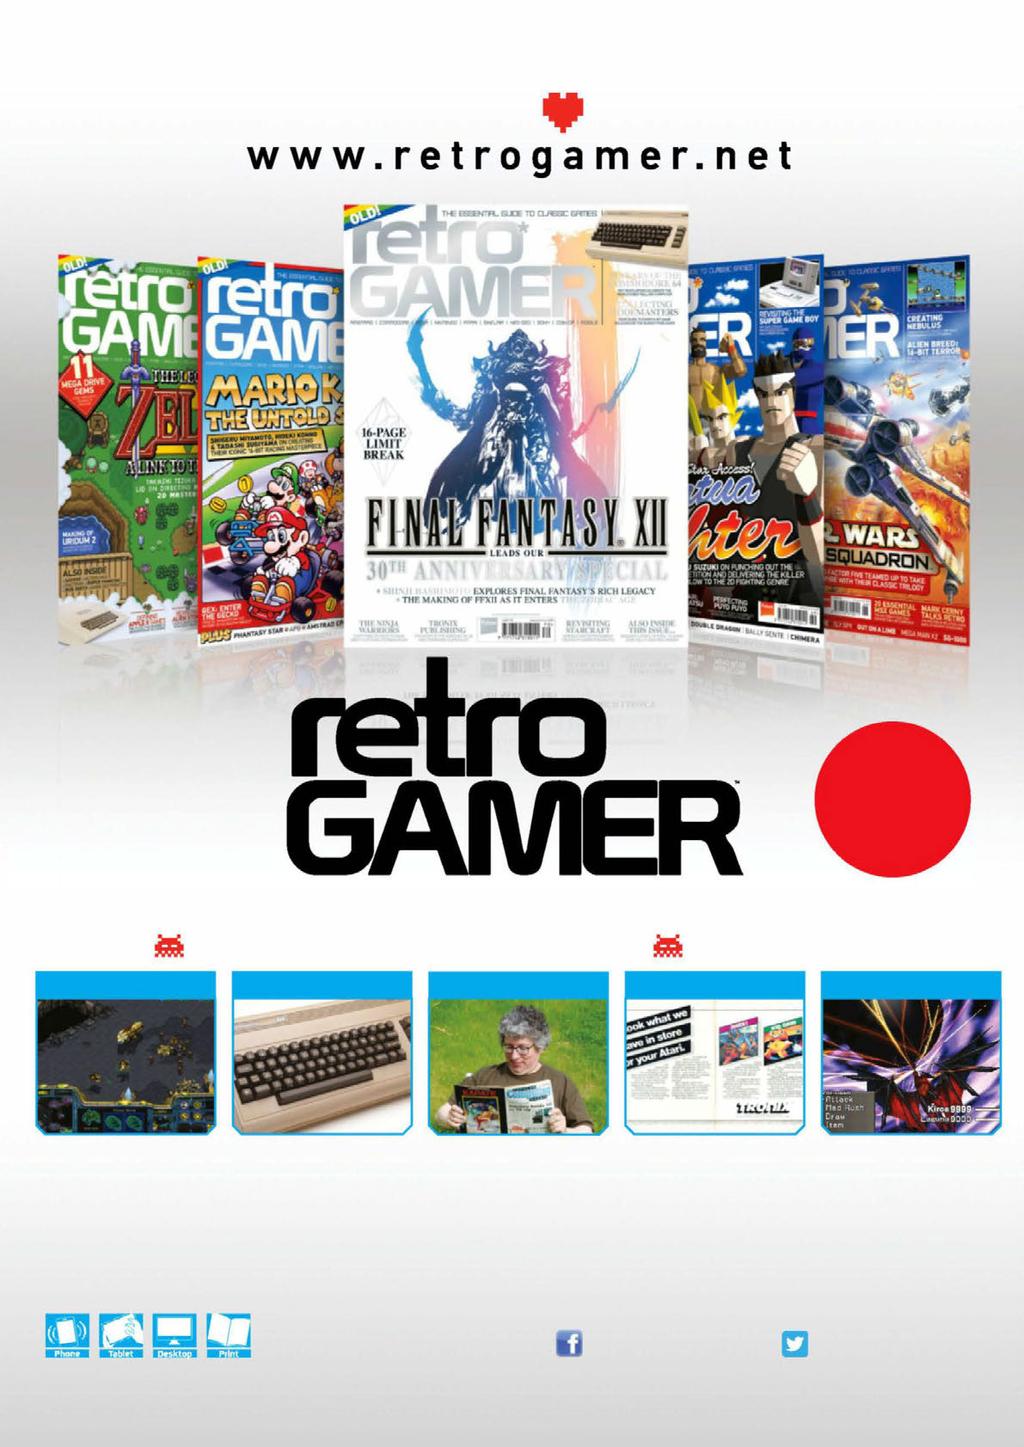 FOR PEOPLE WHO RETRO GAMES t t Available from all good newsagents and supermarkets ON SALE NOW Final Fantasy 30th Anniversary Special Commodore 64 CLASSIC GAMES COOL HARDWARE BIG INTERVIEWS COMPANY